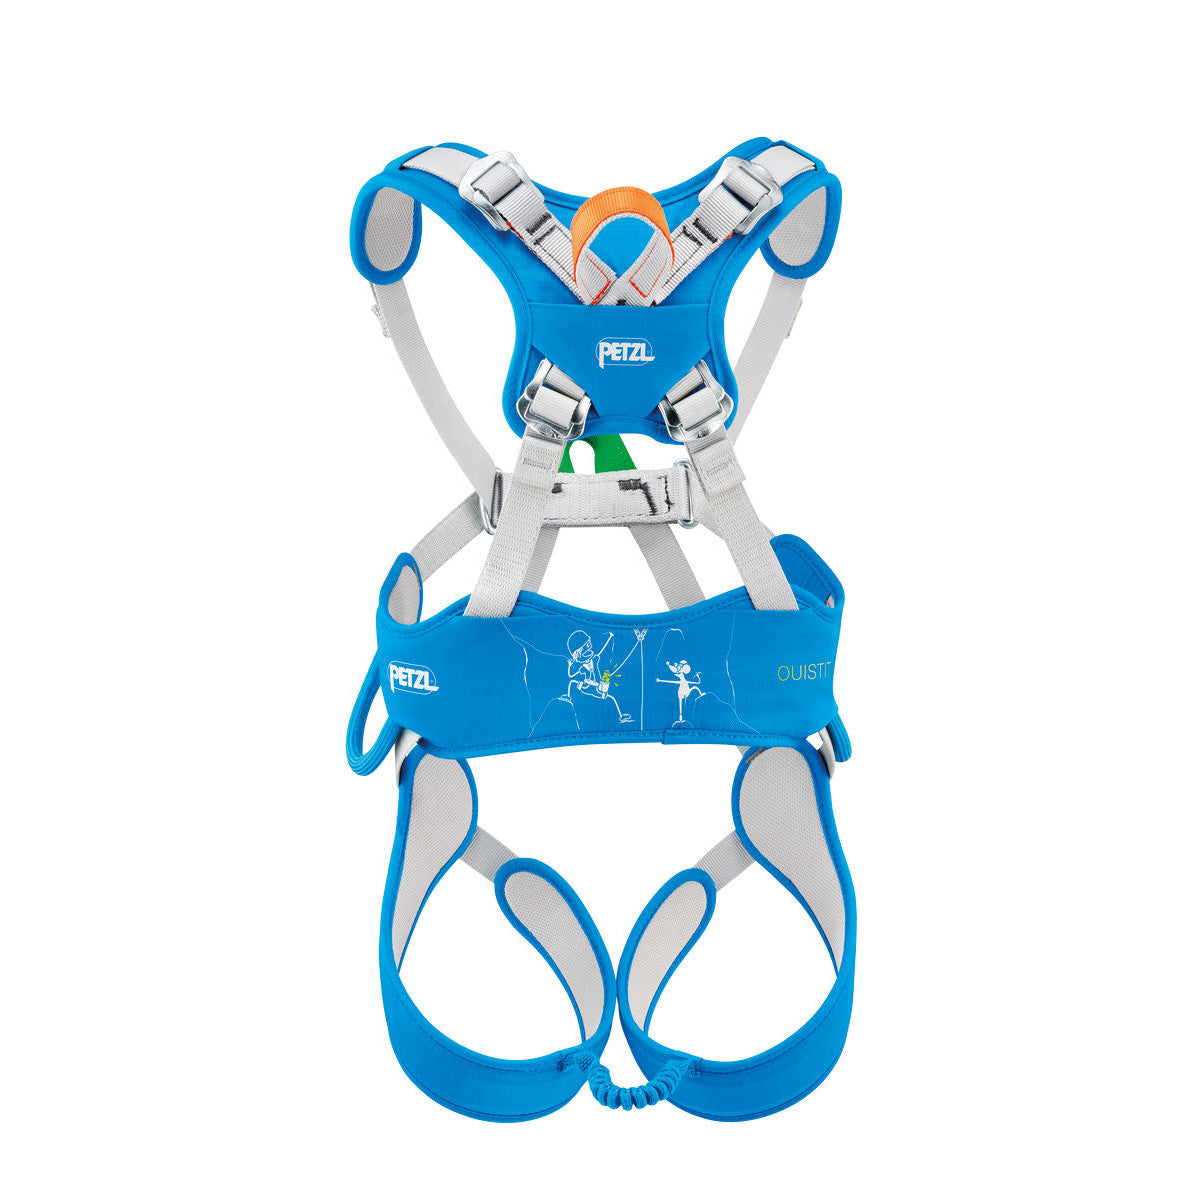 Petzl Ouistiti Kids Harness, rear view, in Blue and Grey colours